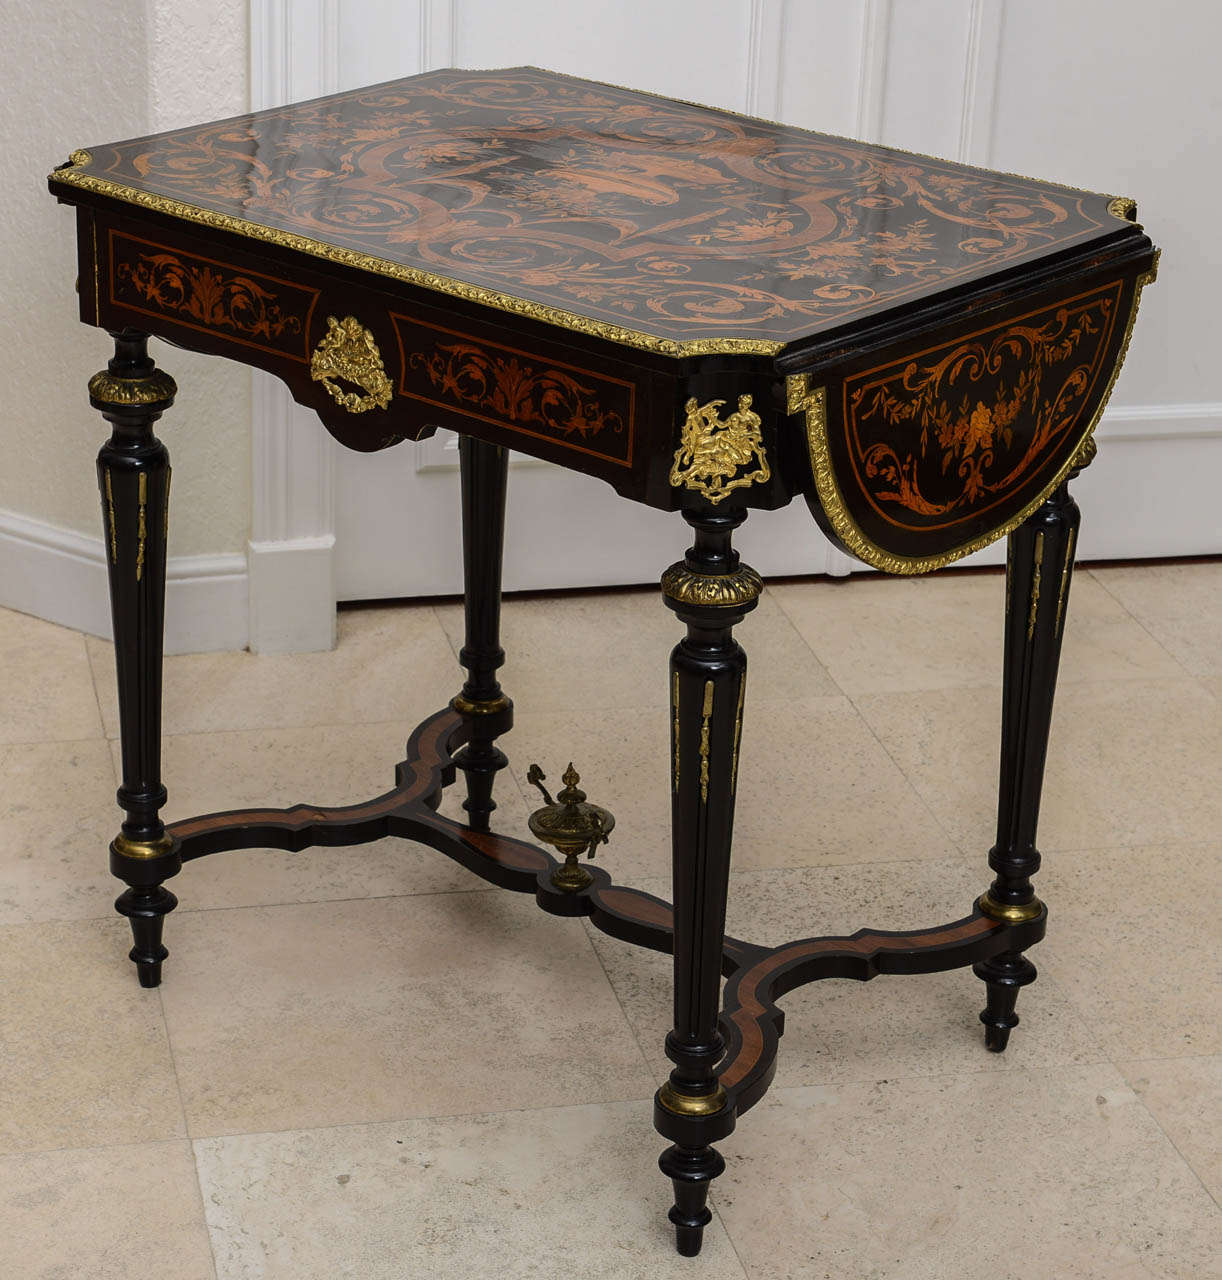 Ormolu French Drop-Leaf Center Table, Vanity, or Desk from the 19th Century For Sale